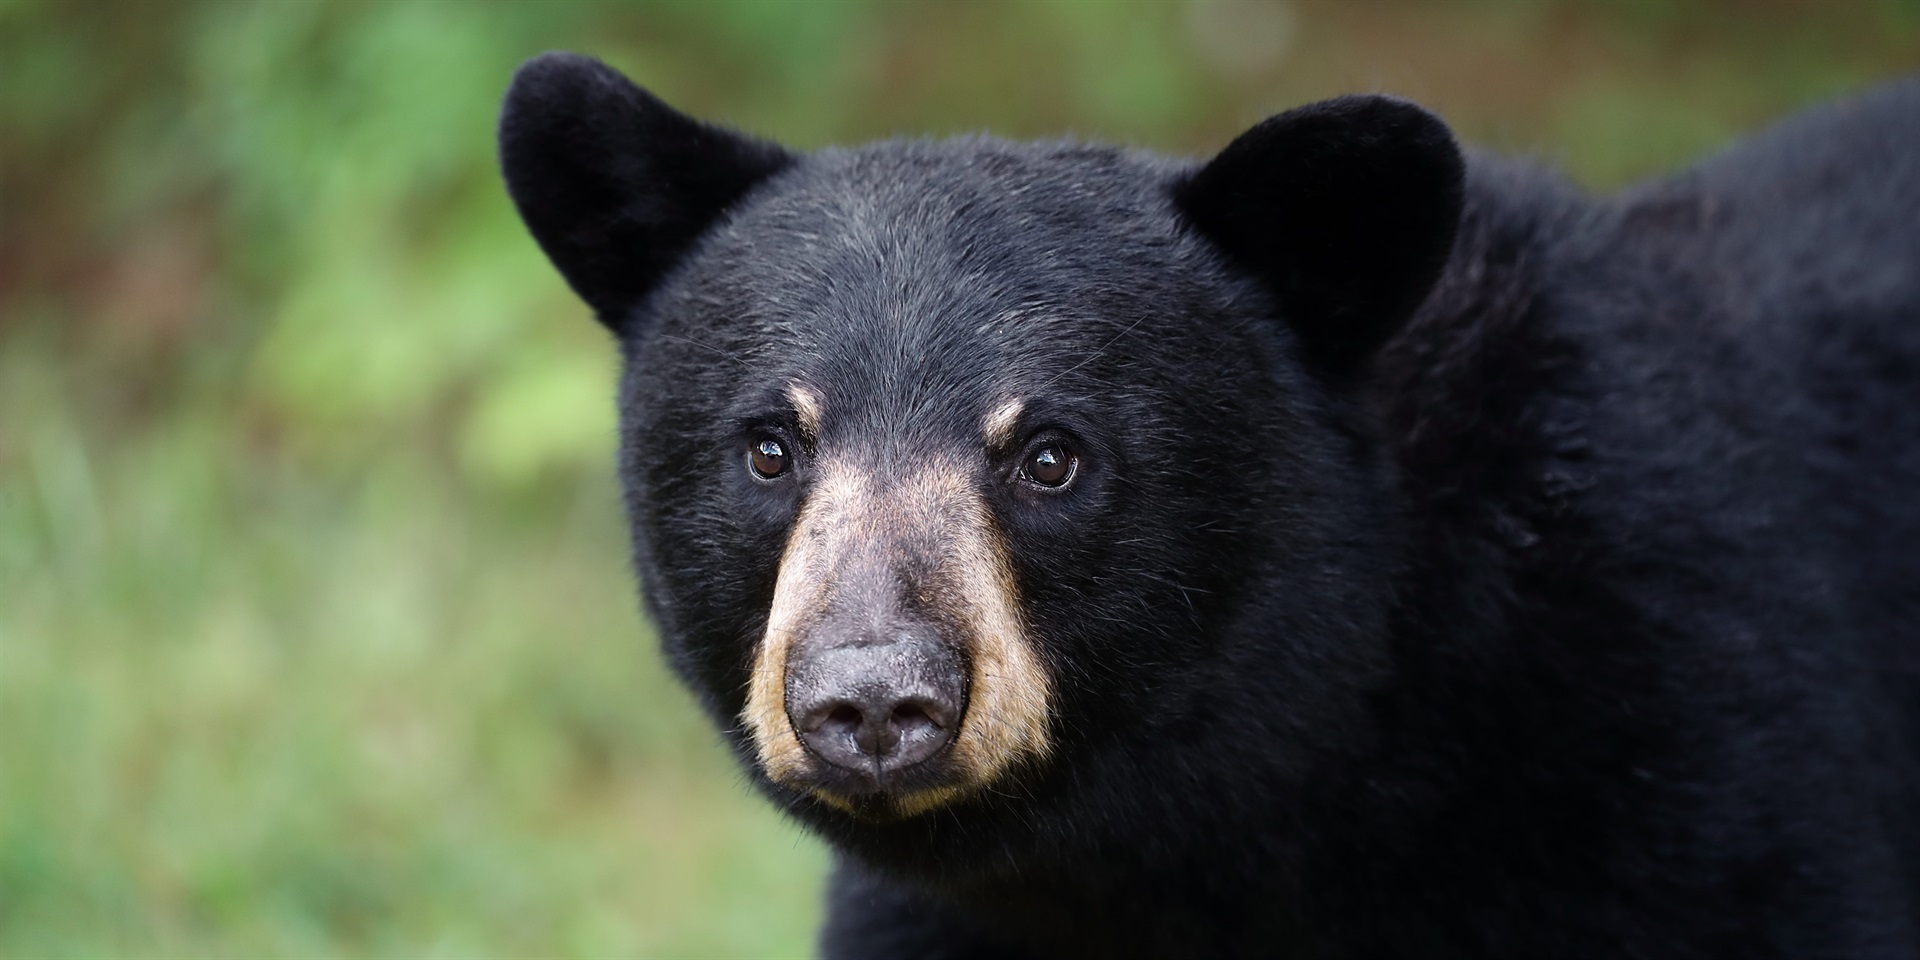 An Italian court suspended for at least another month a culling order for a bear.